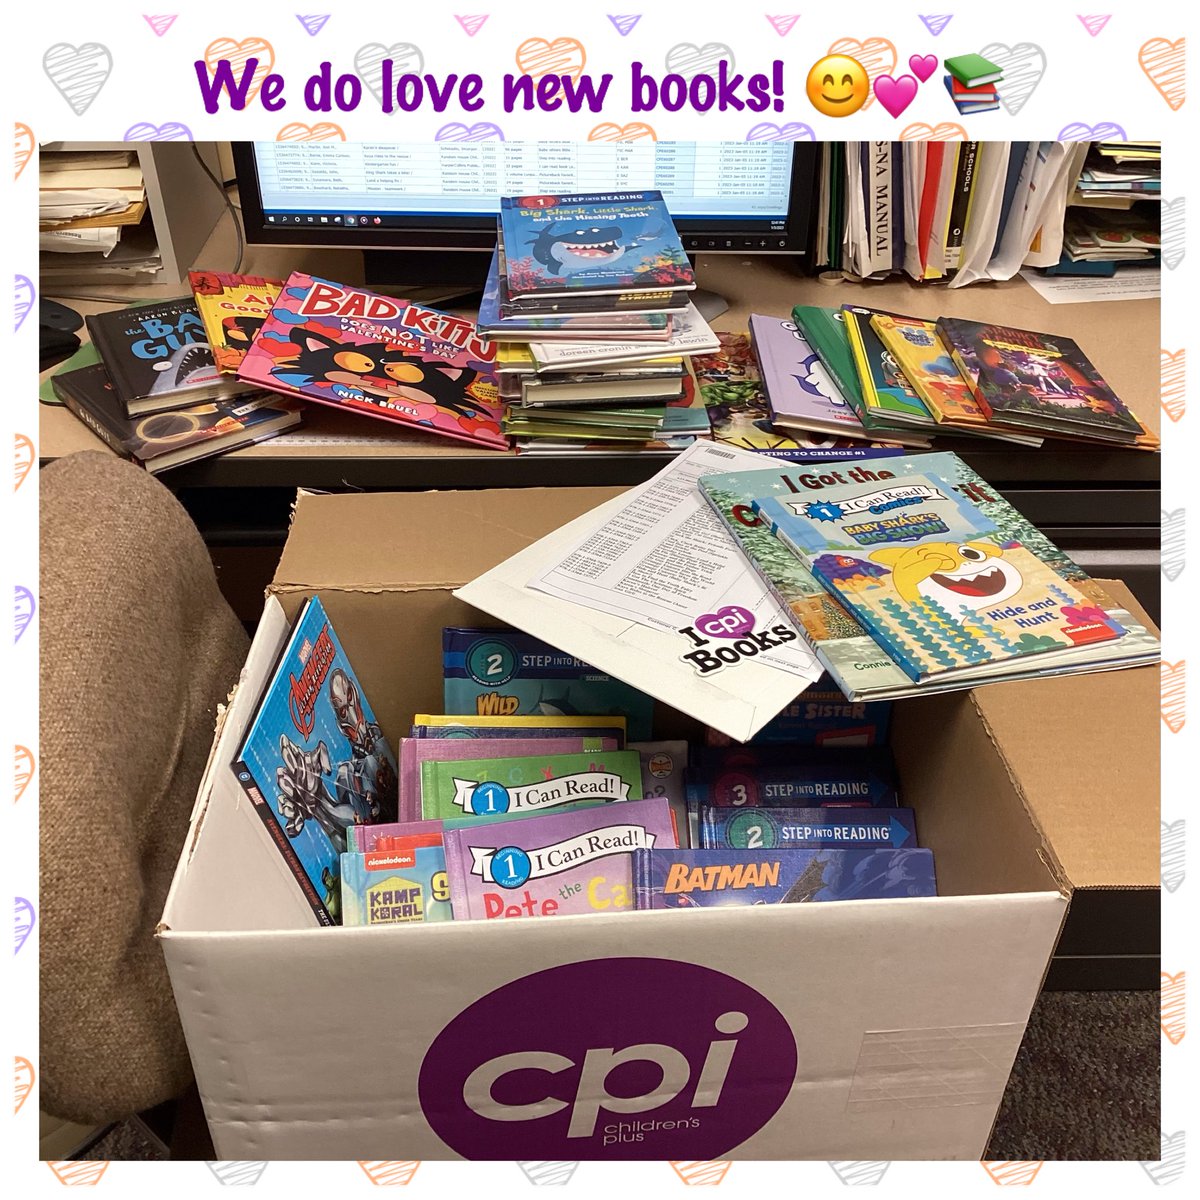 Thanks, @helloCPI for our new books! #UNBOXCPI #readingmatters #schoollibrariesmatter